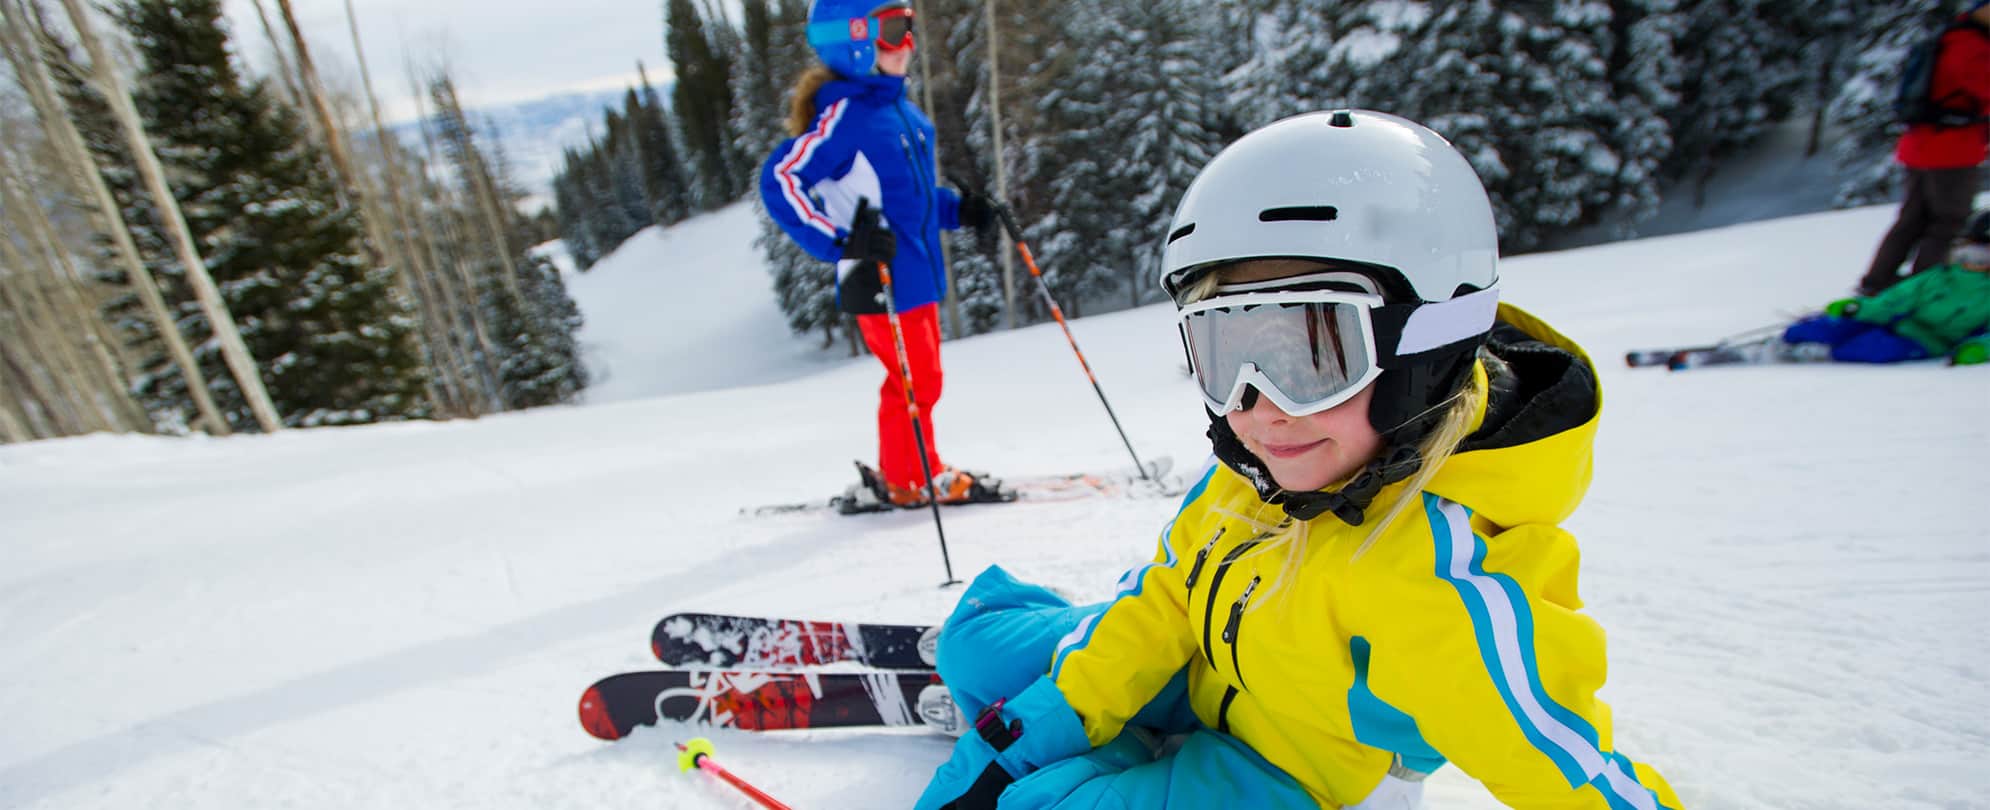 Young kids in goggles, helmets, and ski gear enjoy skiing in Park City, Utah.